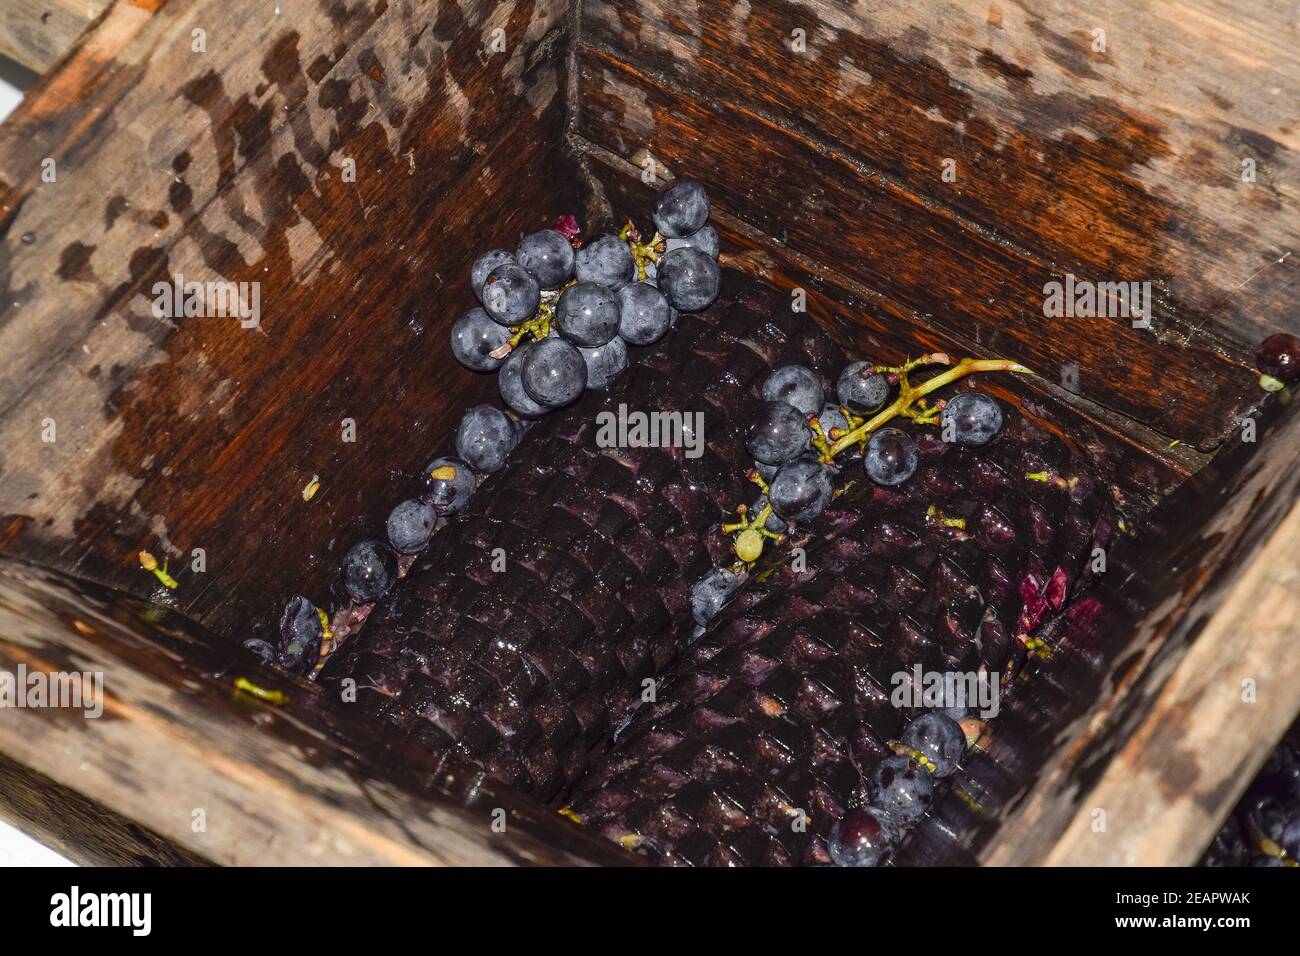 Manual mechanism for crushing grapes. Crush the grapes into juice and wine Stock Photo